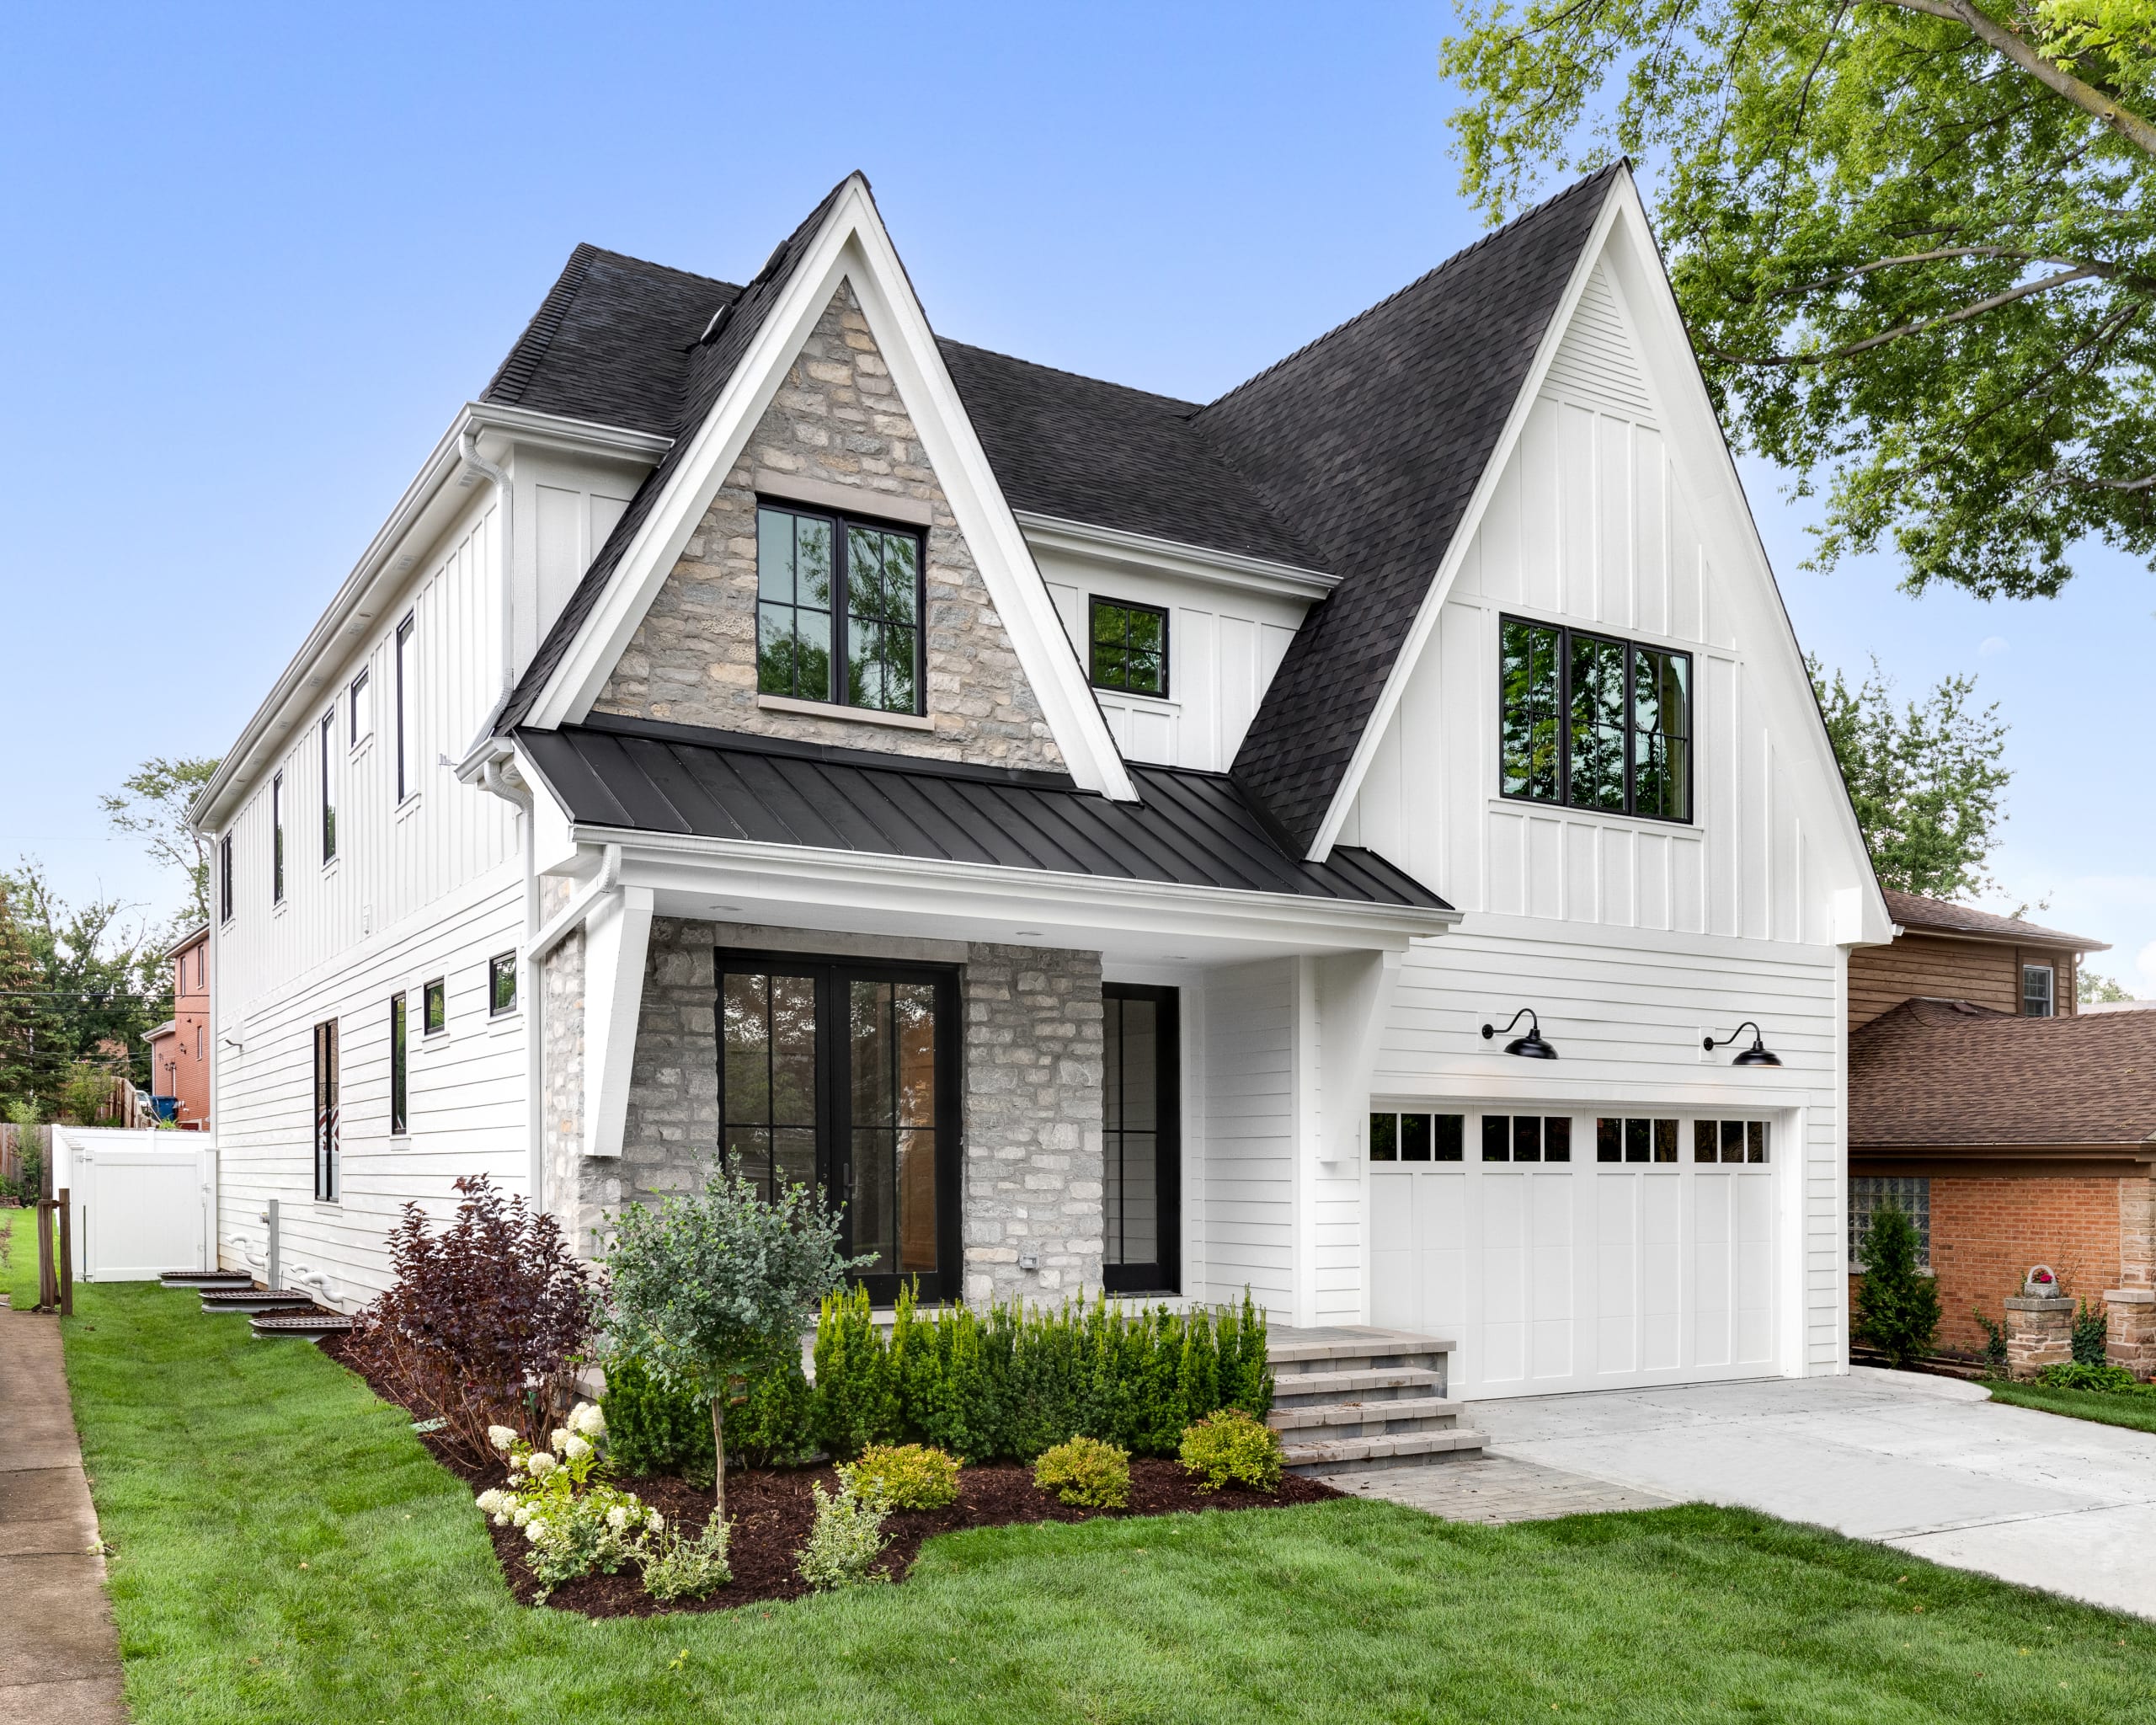 Boost Your Curb Appeal: Why Investing in a Garage Door Replacement Is Worth It post image alt text